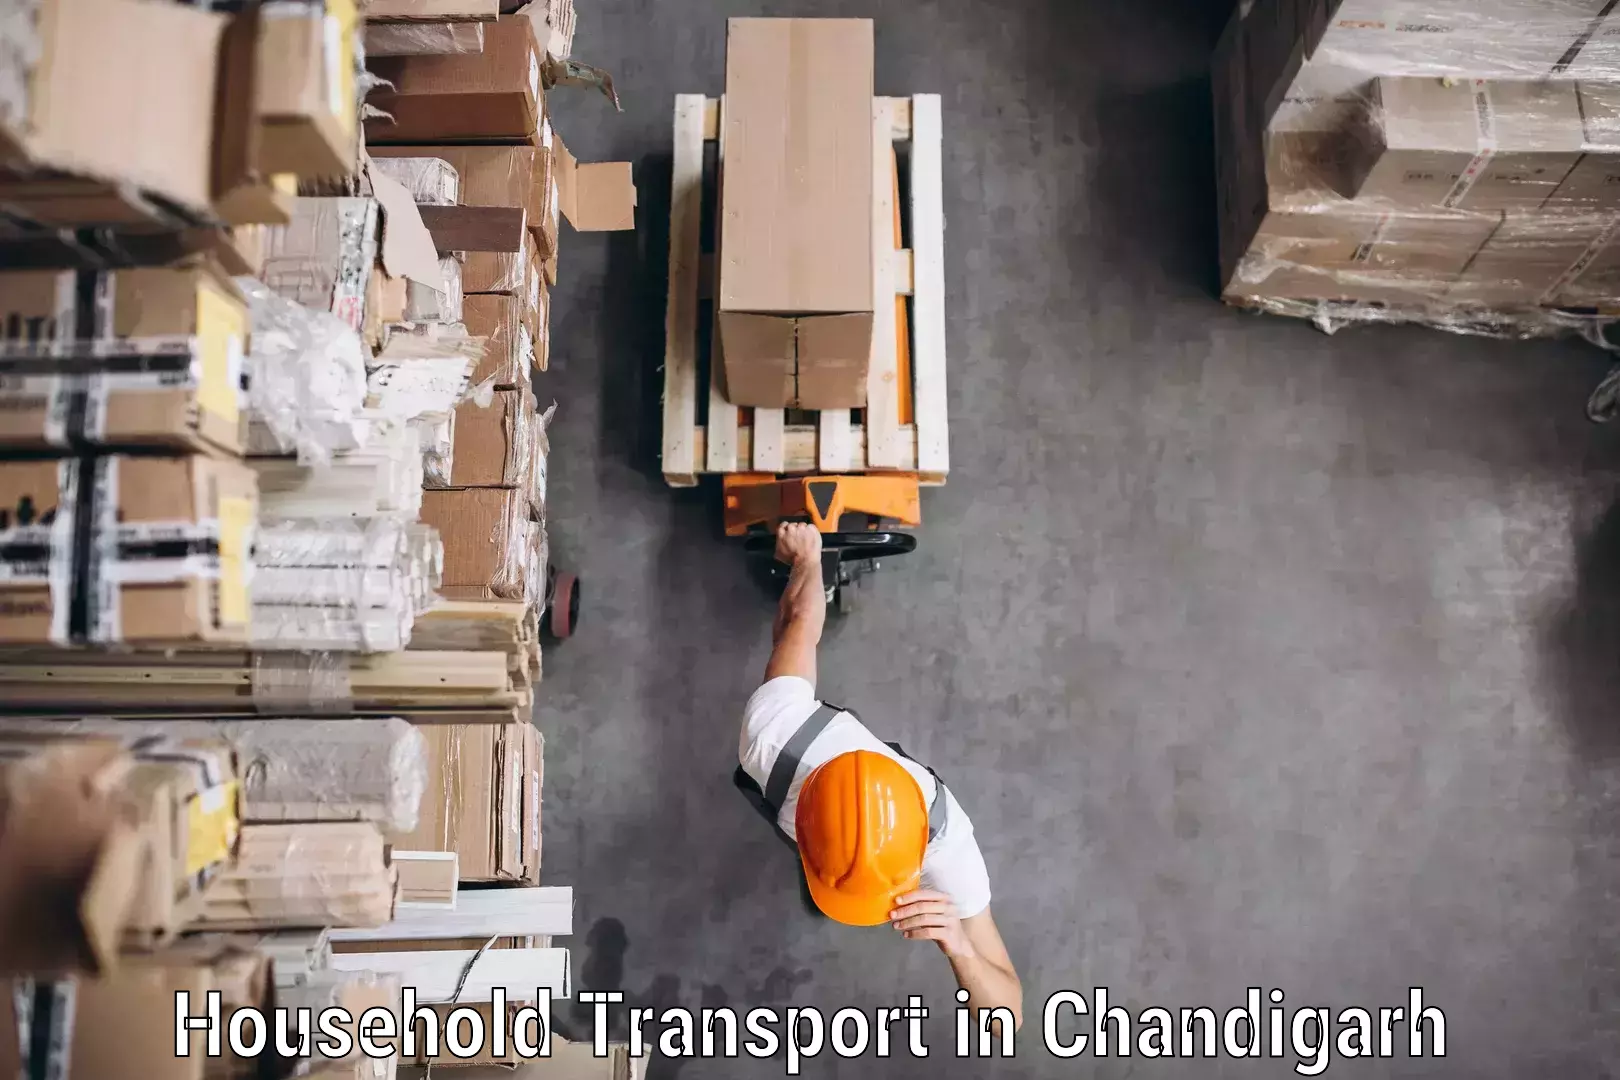 Furniture delivery service in Chandigarh